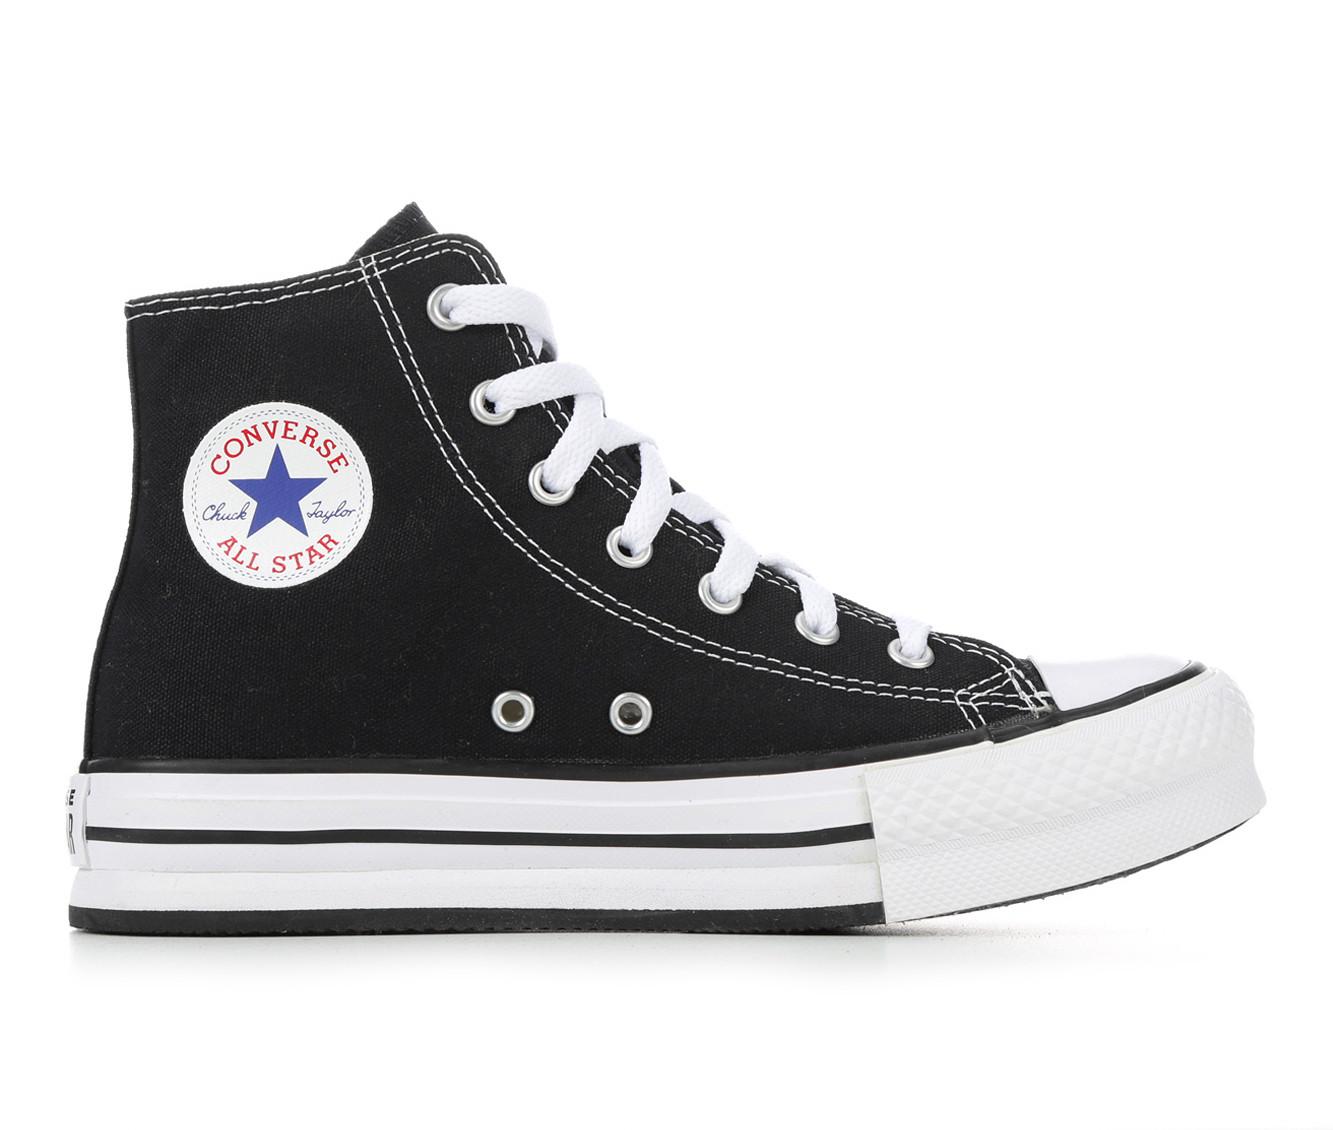 Converse Shoes & Sneakers | Carnival